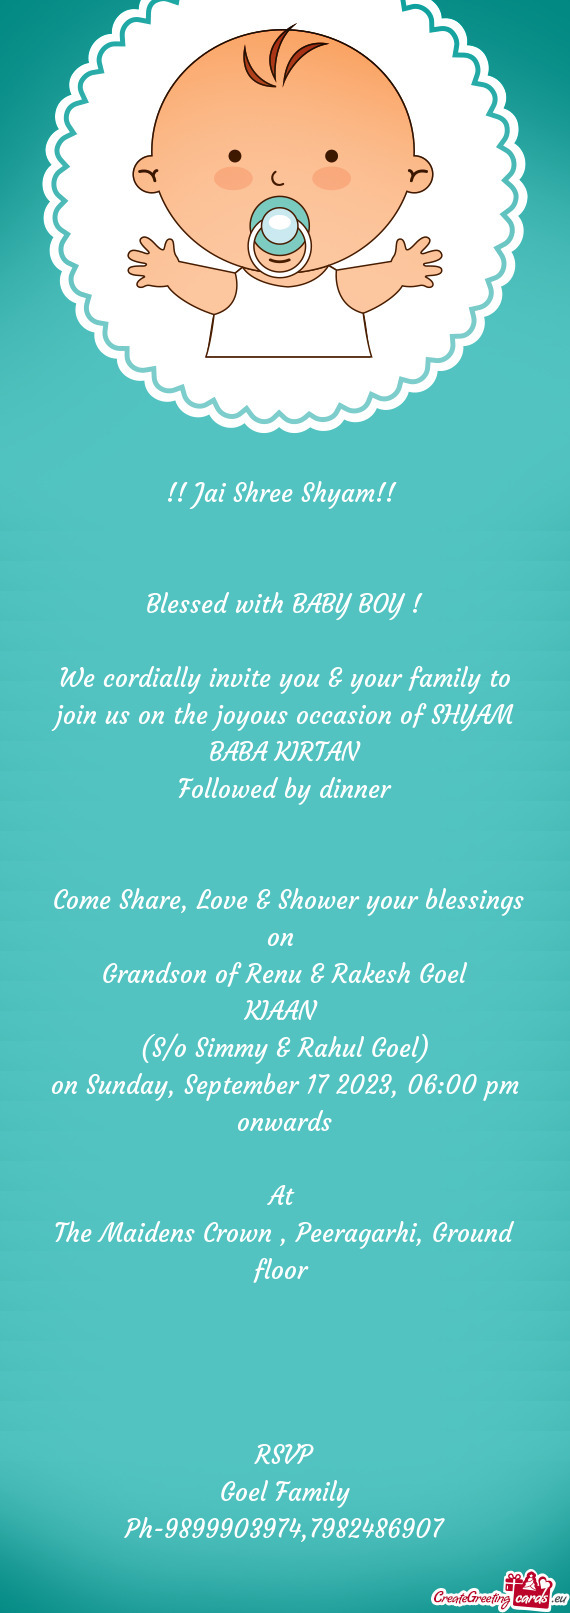 We cordially invite you & your family to join us on the joyous occasion of SHYAM BABA KIRTAN